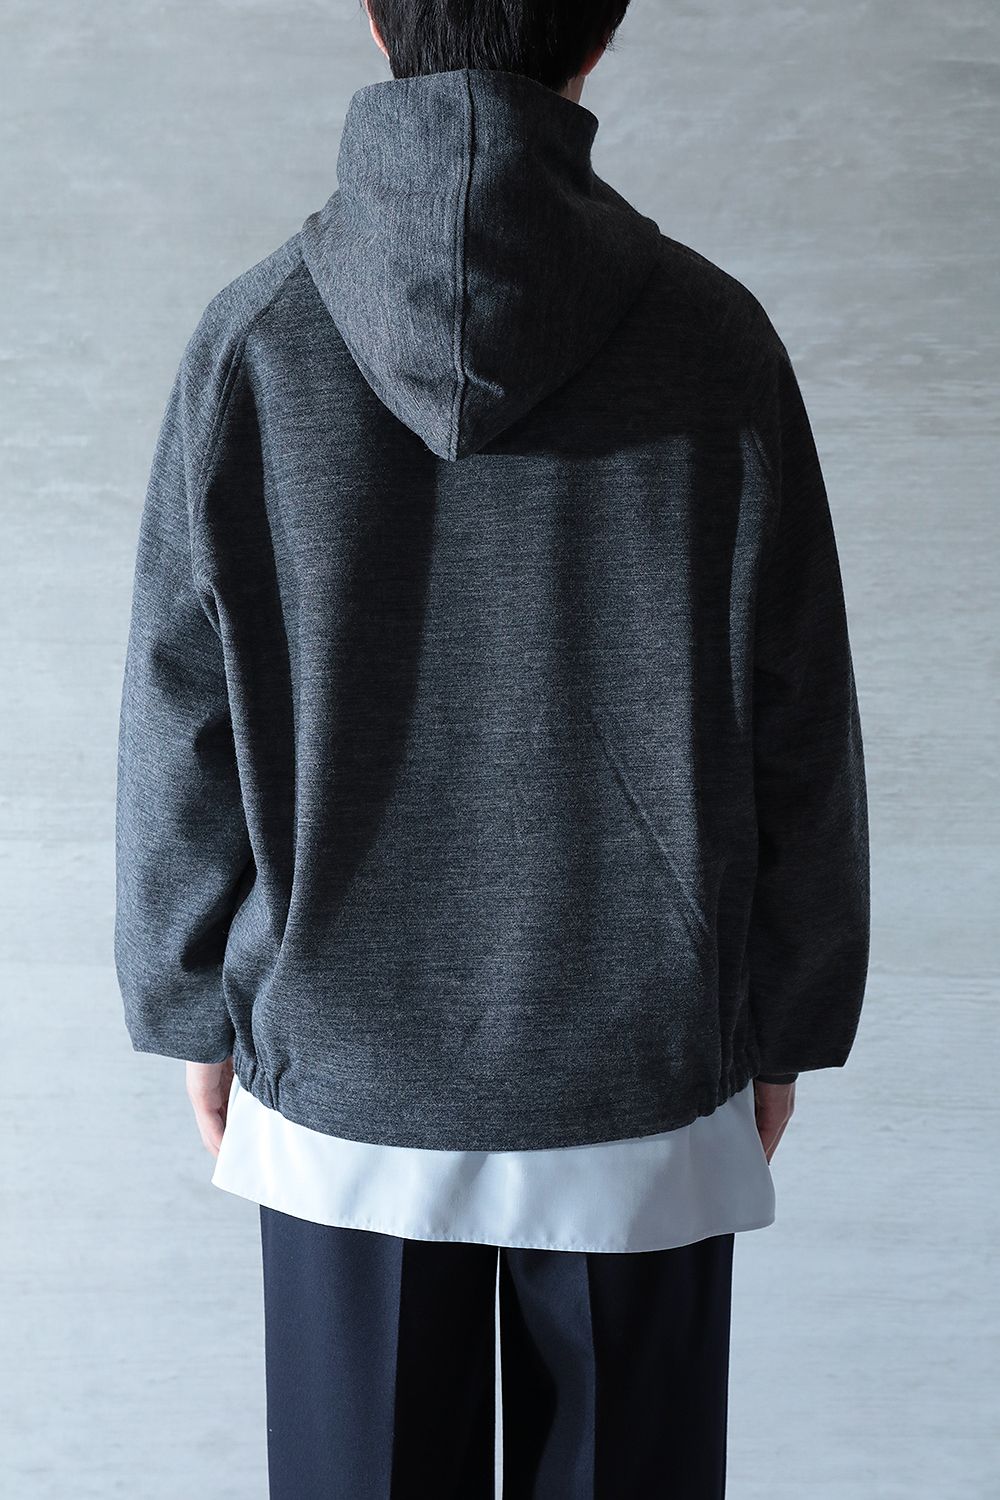 THE RERACS - 【23AW/ラスト1点】RERACS HALF ZIP HOODED PULLOVER(TOP